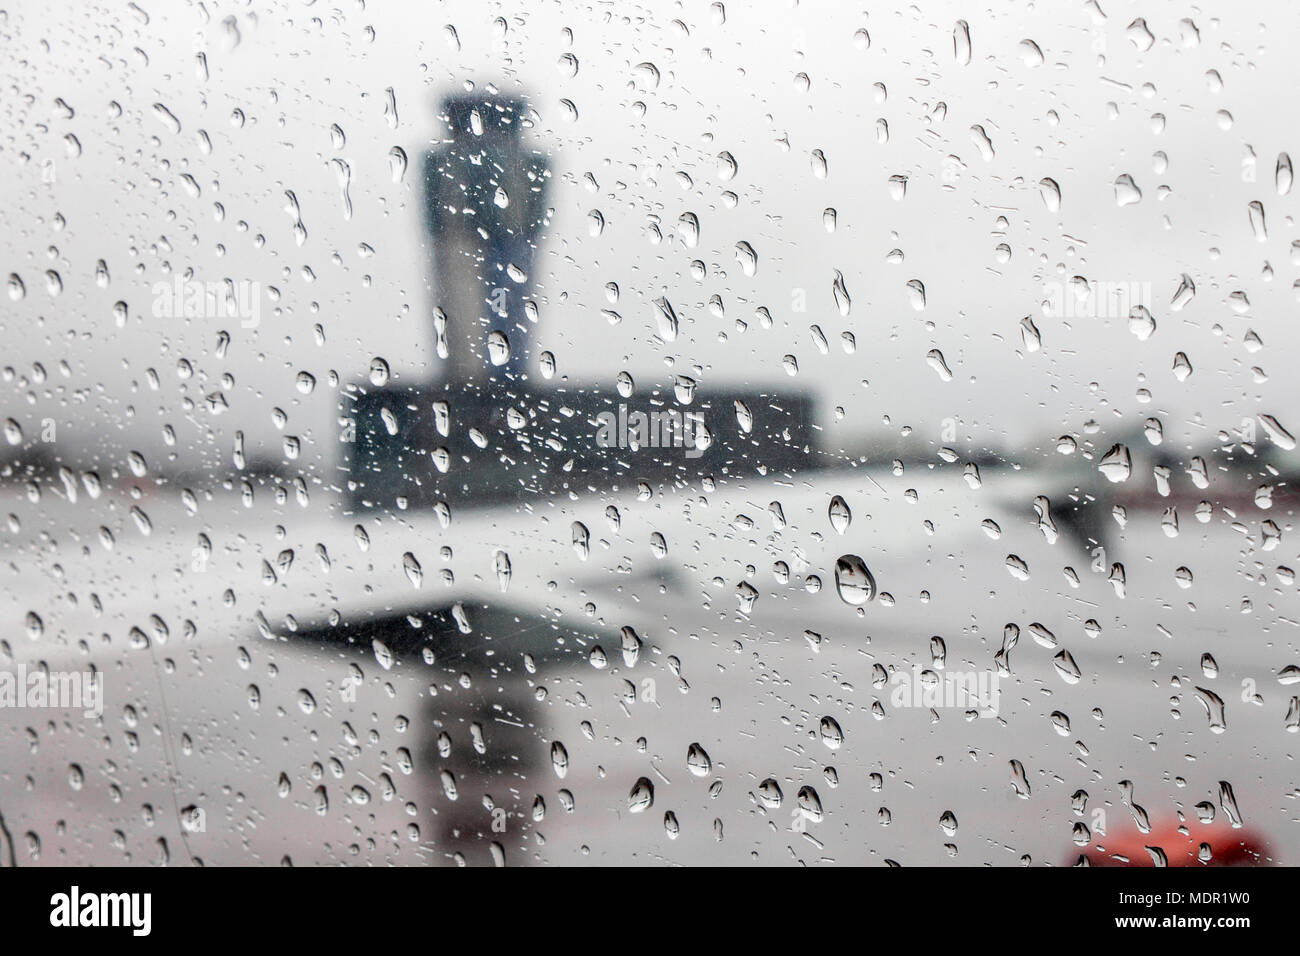 Views of the Santiago de Compostela - Lavacolla Airport air traffic control tower on a rainy day, through an aircraft window covered with raindrops Stock Photo